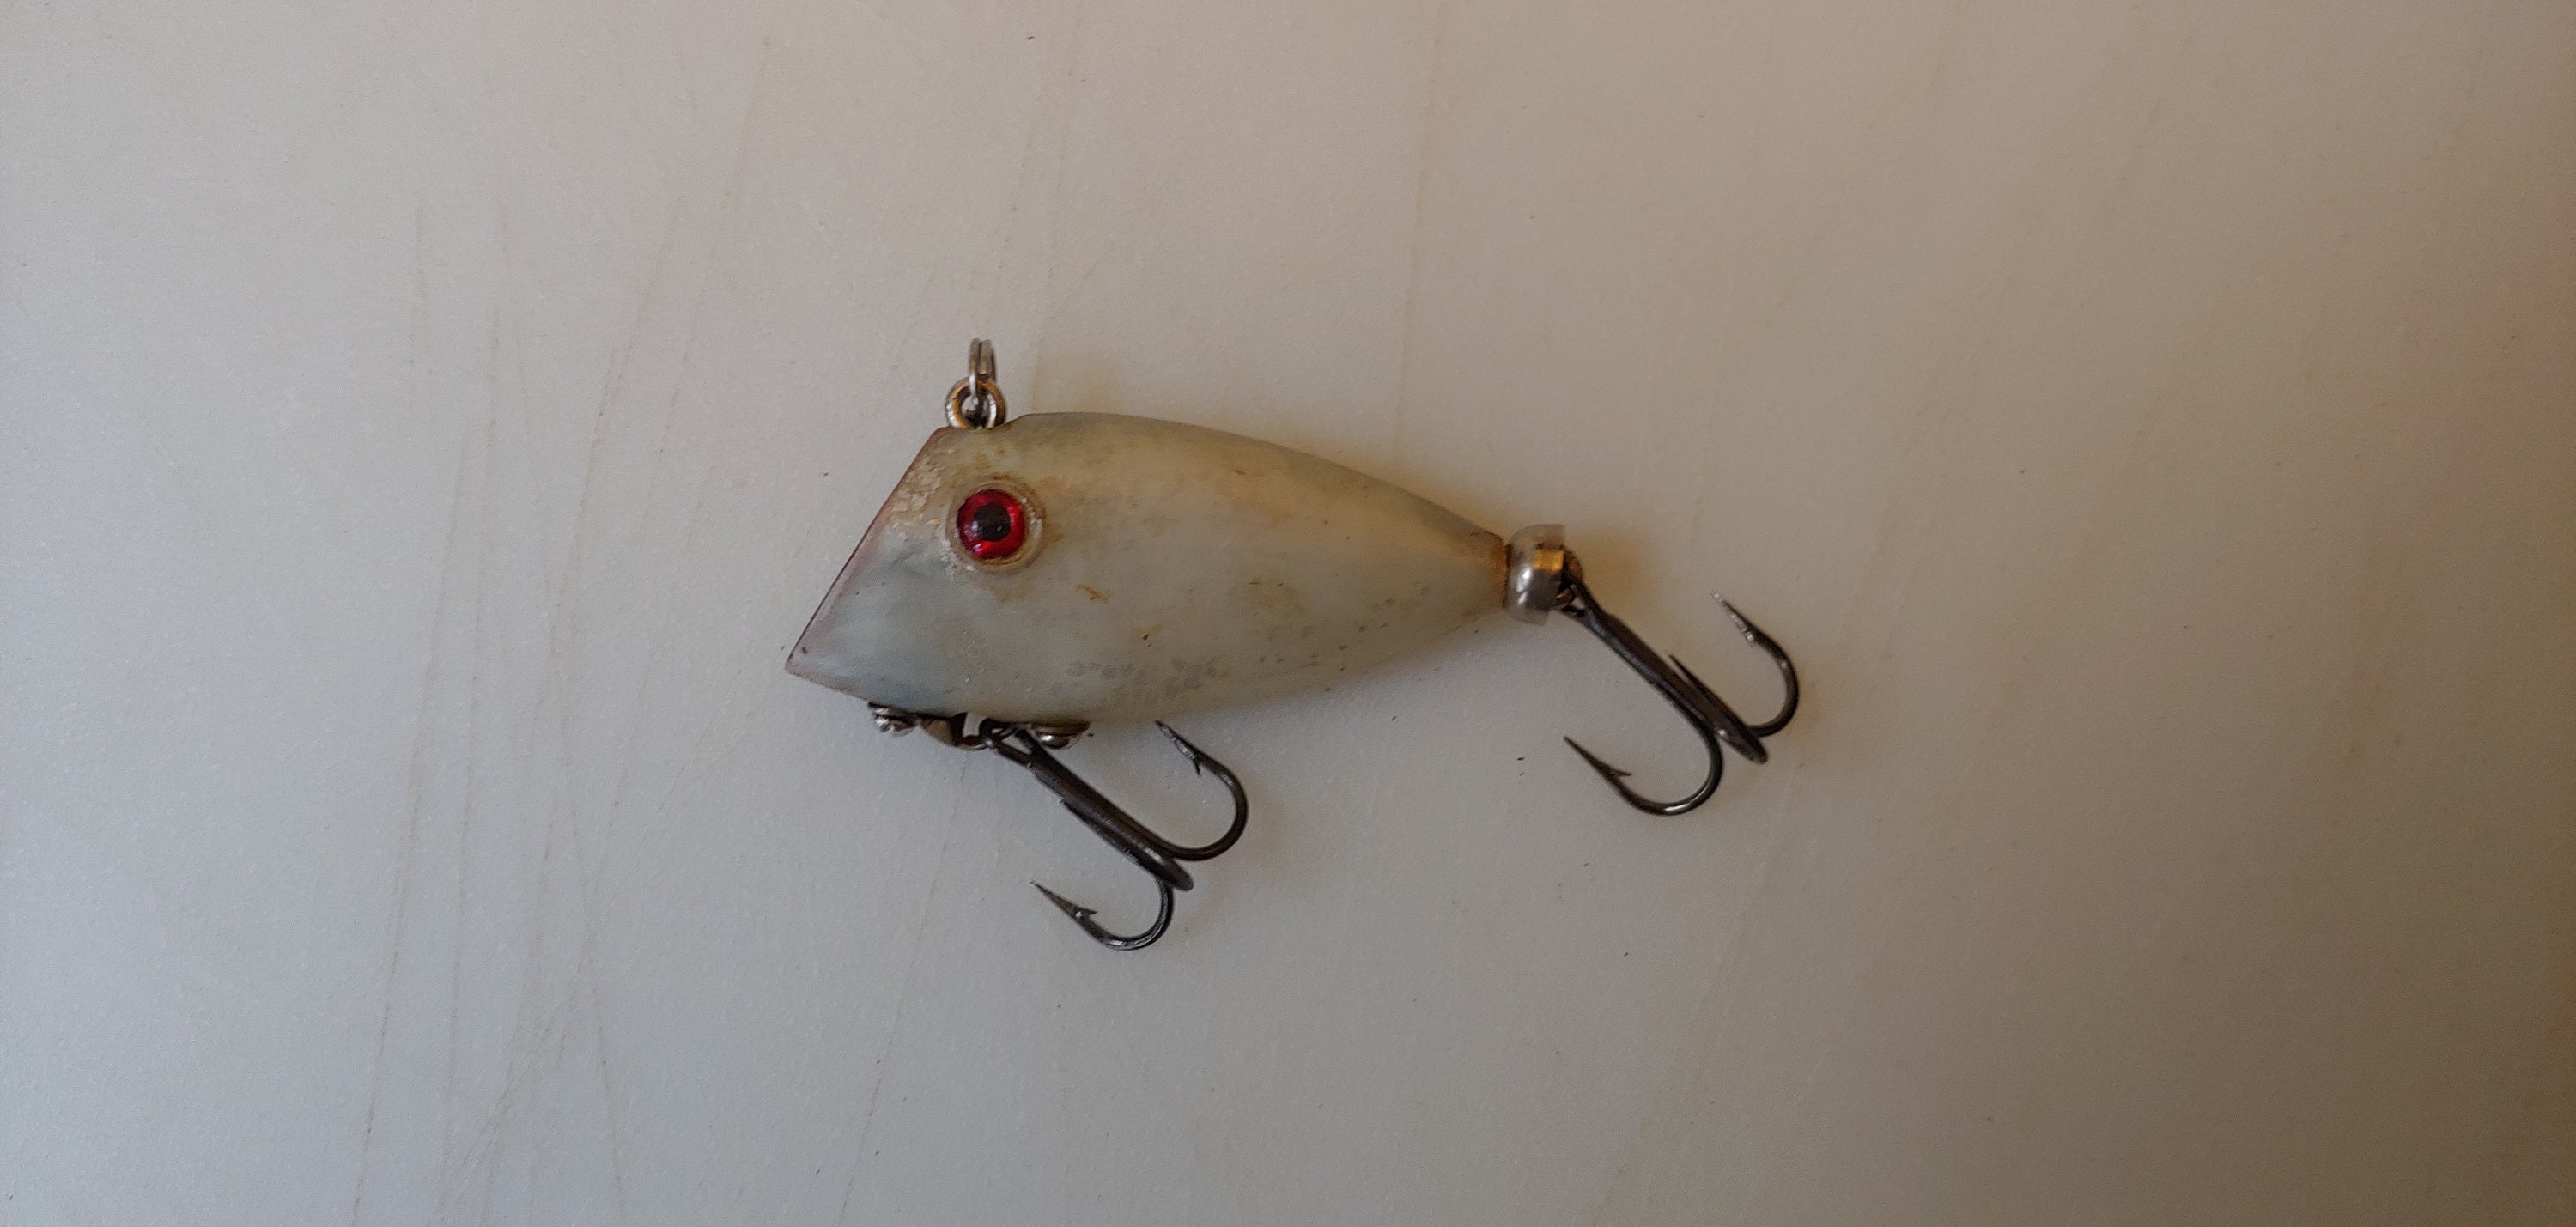 Lot of 2 Vintage Whopper Stopper Hellbender Fishing Lures!!! - AbuMaizar  Dental Roots Clinic